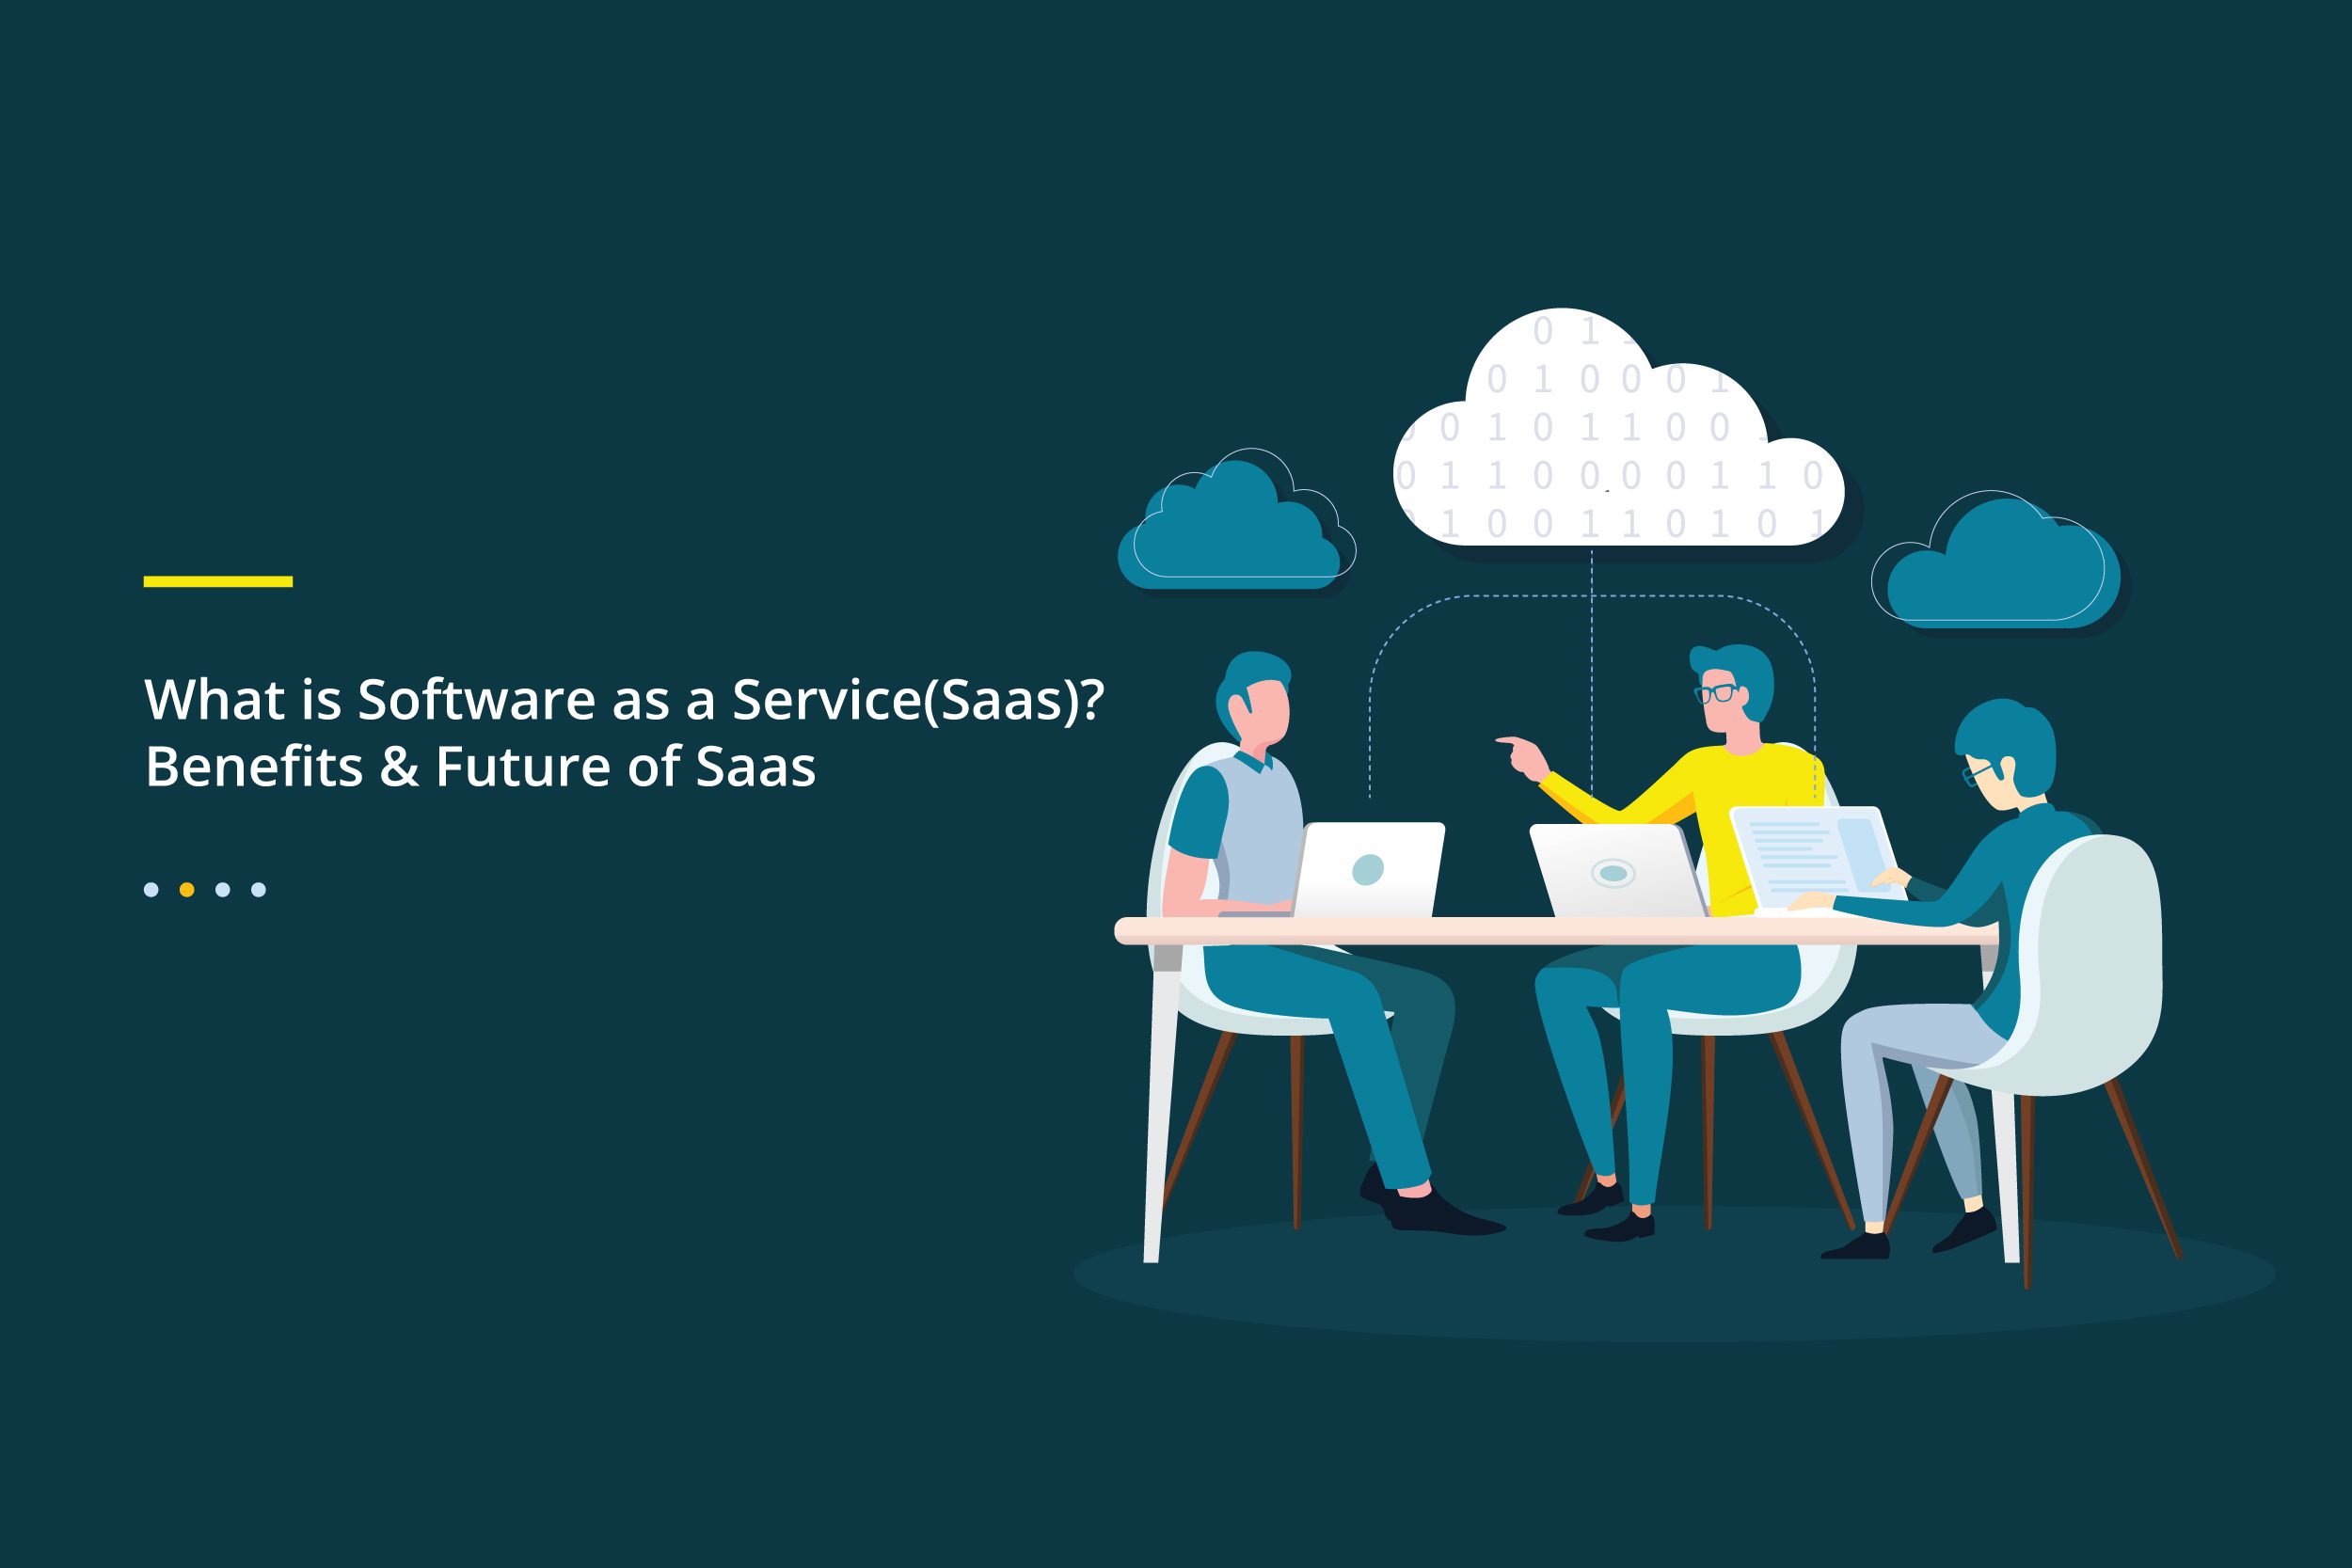 What is Software as a Service (Saas)? Benefits & Future of Saas